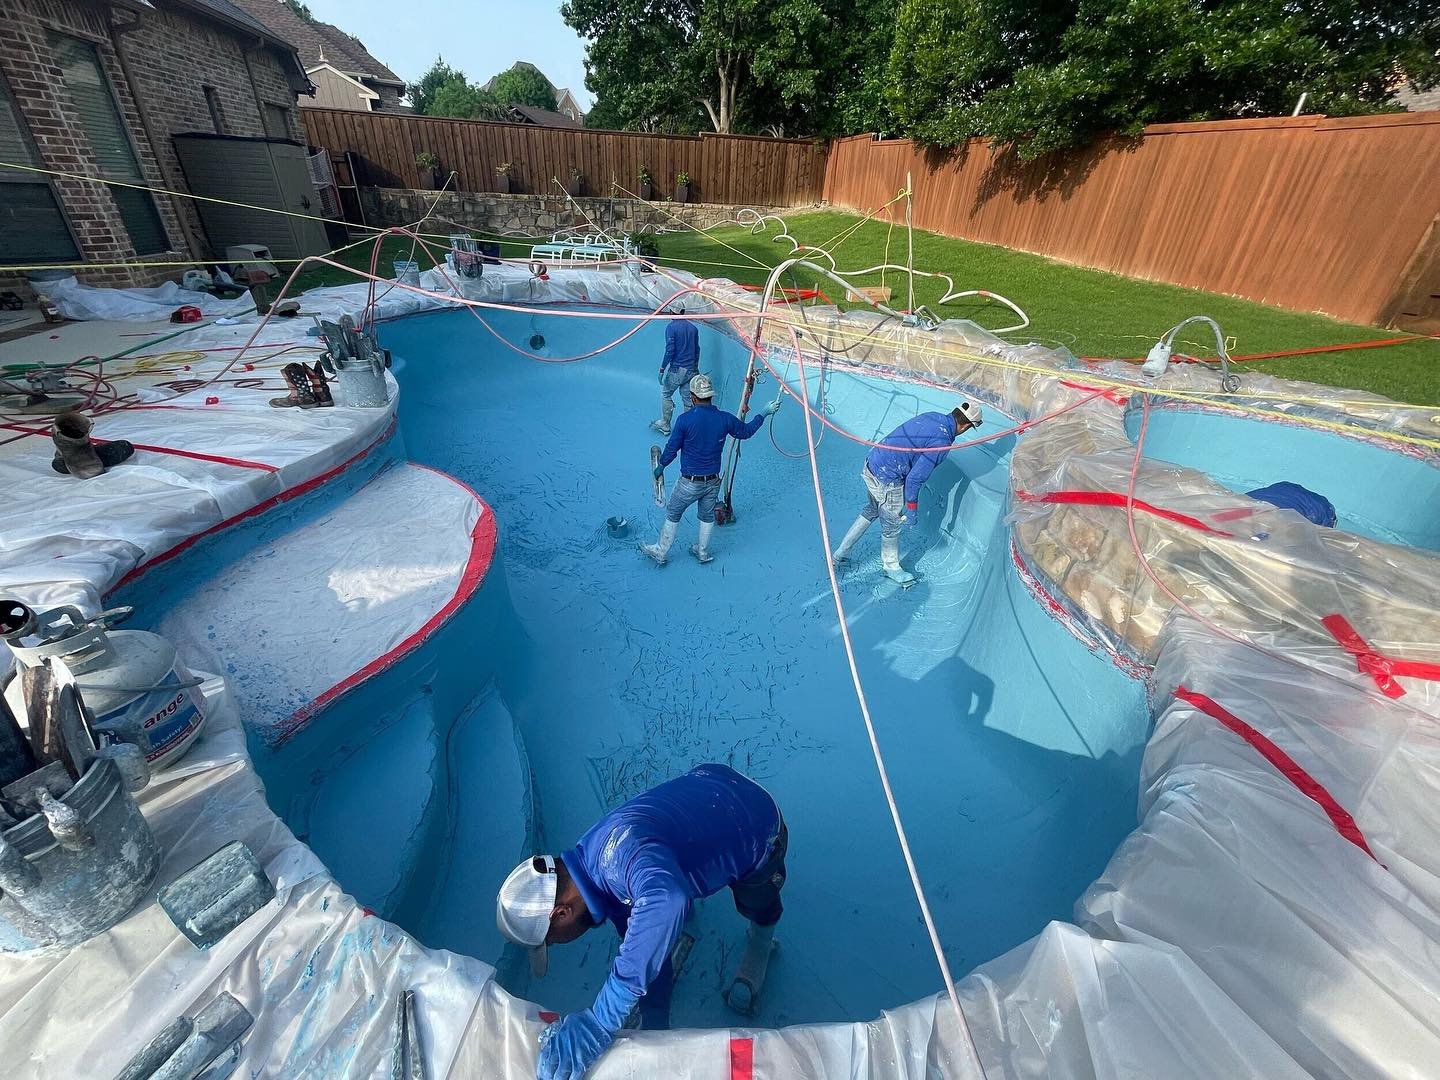 The beautiful Brilliant Blue plaster! ✨💙

Are you ready to replaster your pool? Or interested in other renovation options? Send us a message or call us at (972) 423-7178 to get started! 📞

#FoleyPools #pool #outdoorliving #pooldesign #construction 